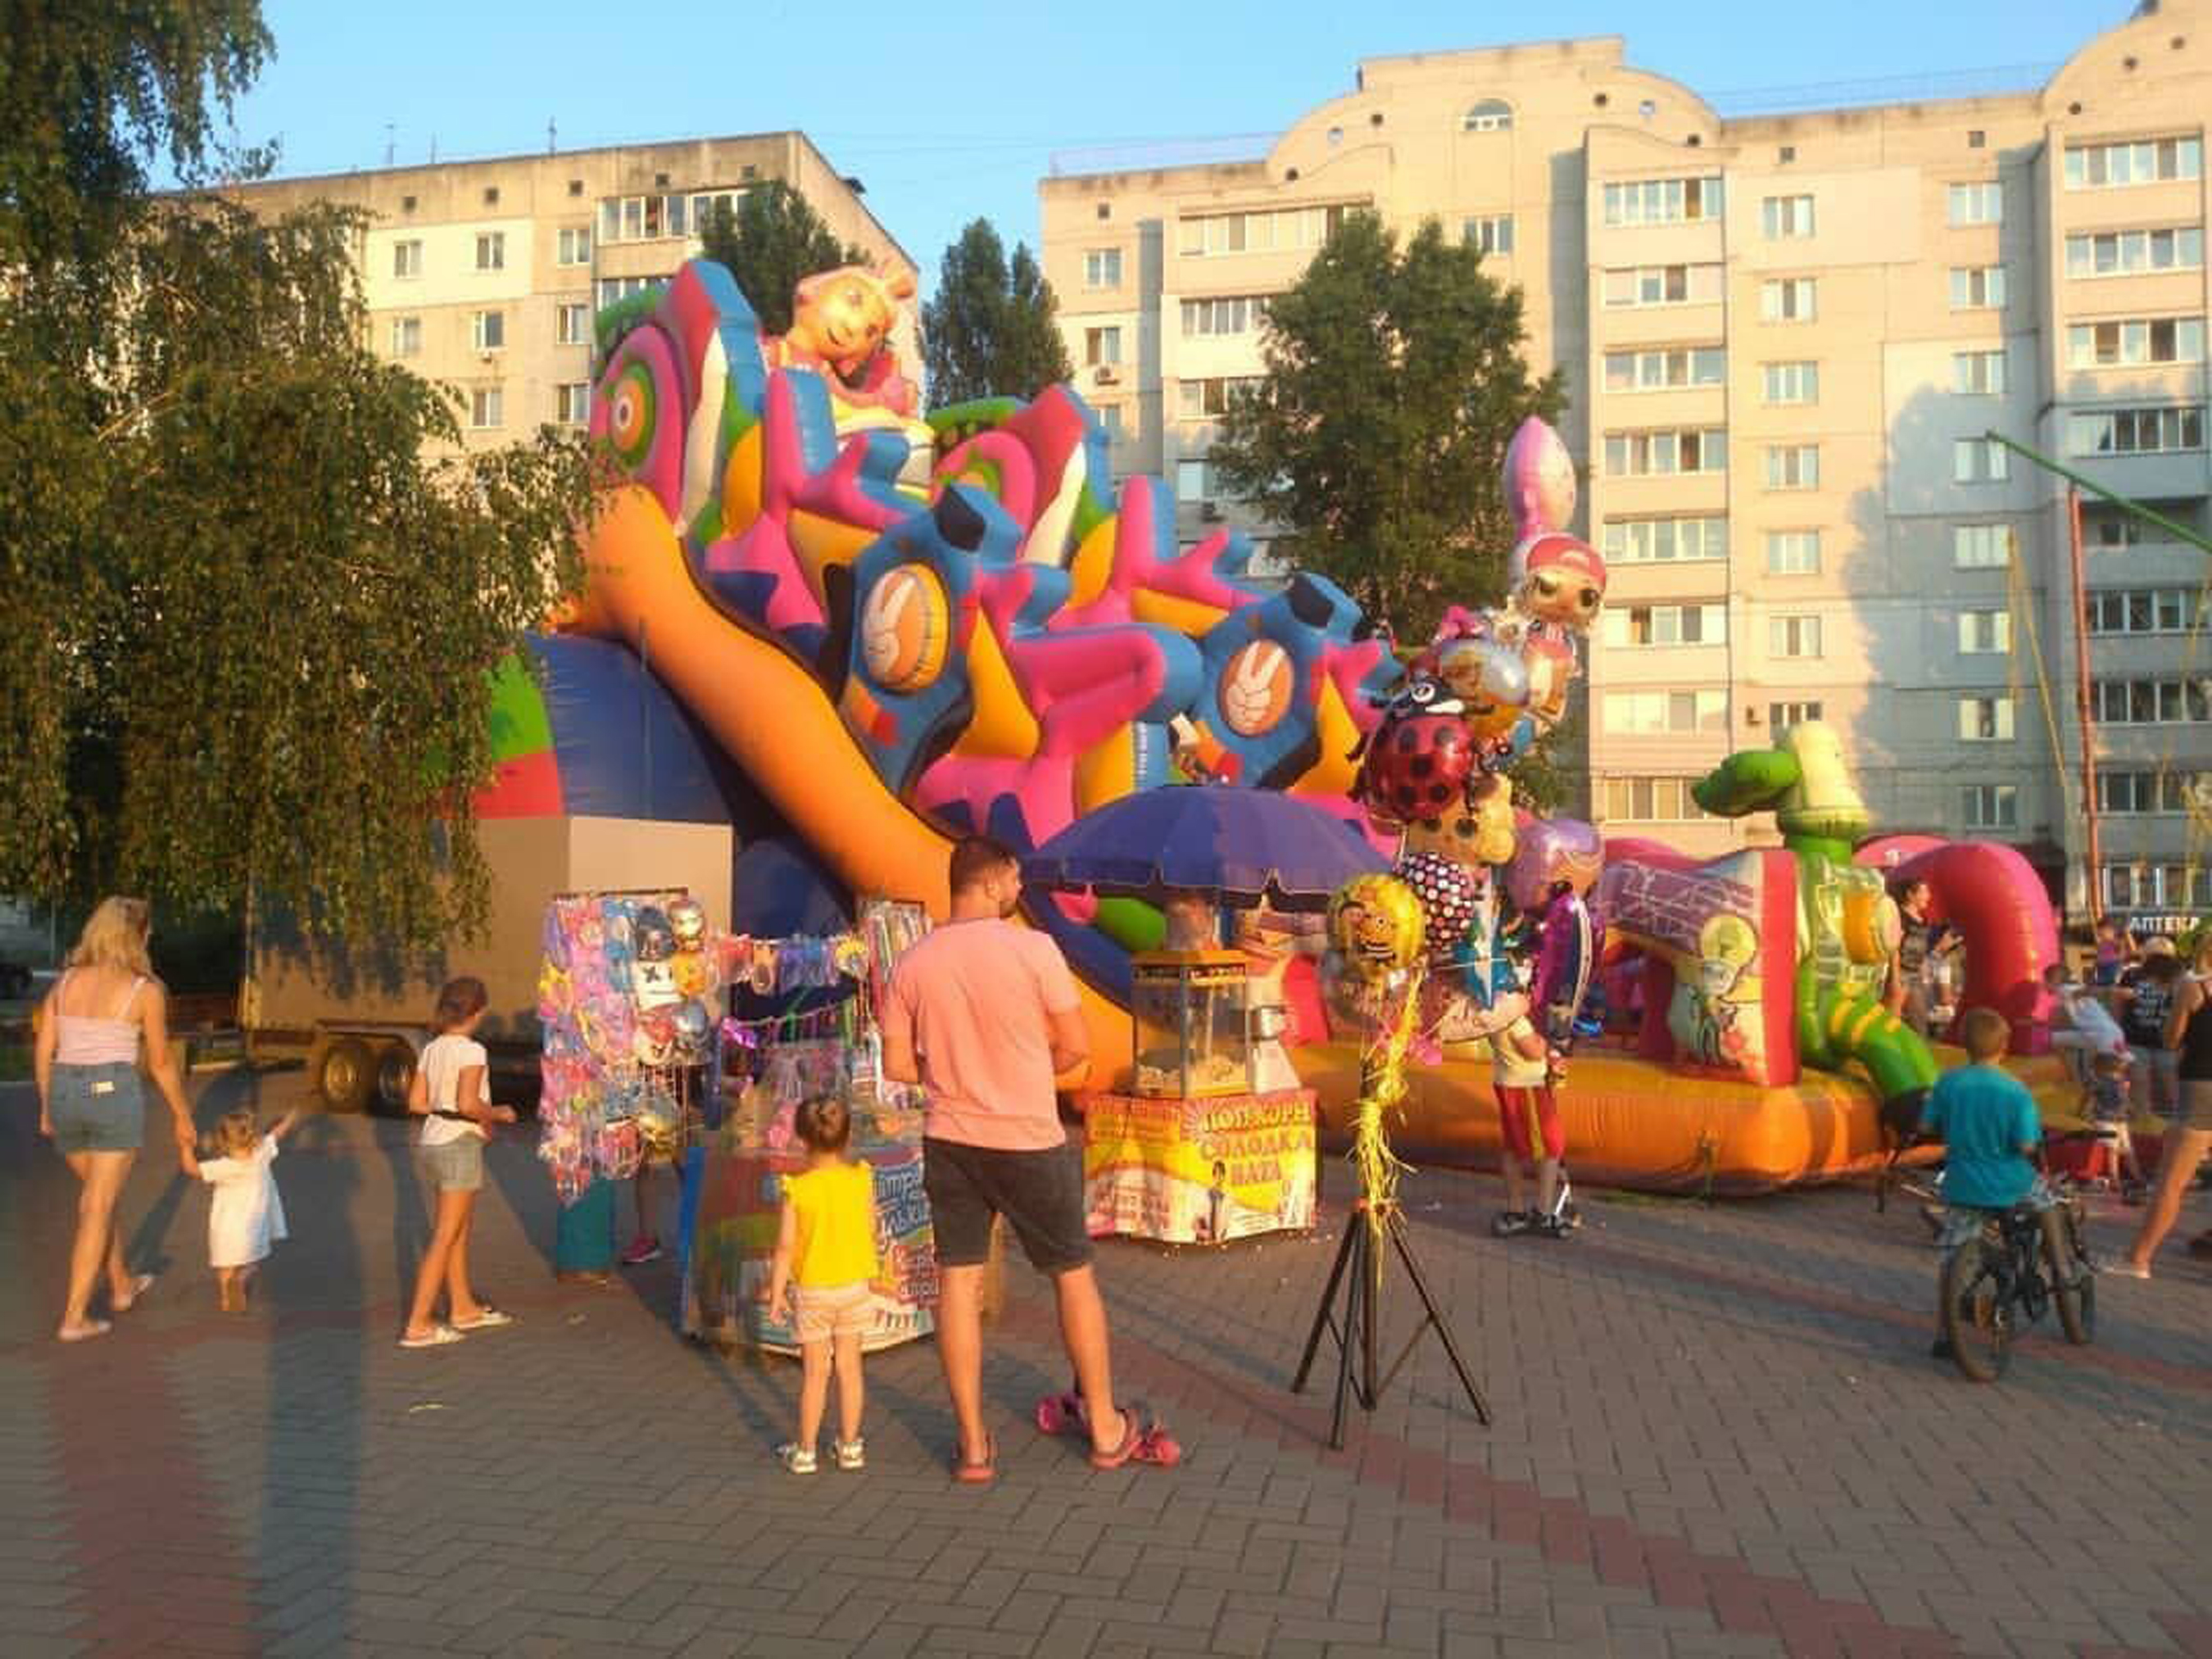 Popcorn and toy vendors by a huge colorful children’s inflatable in front of an apartment block